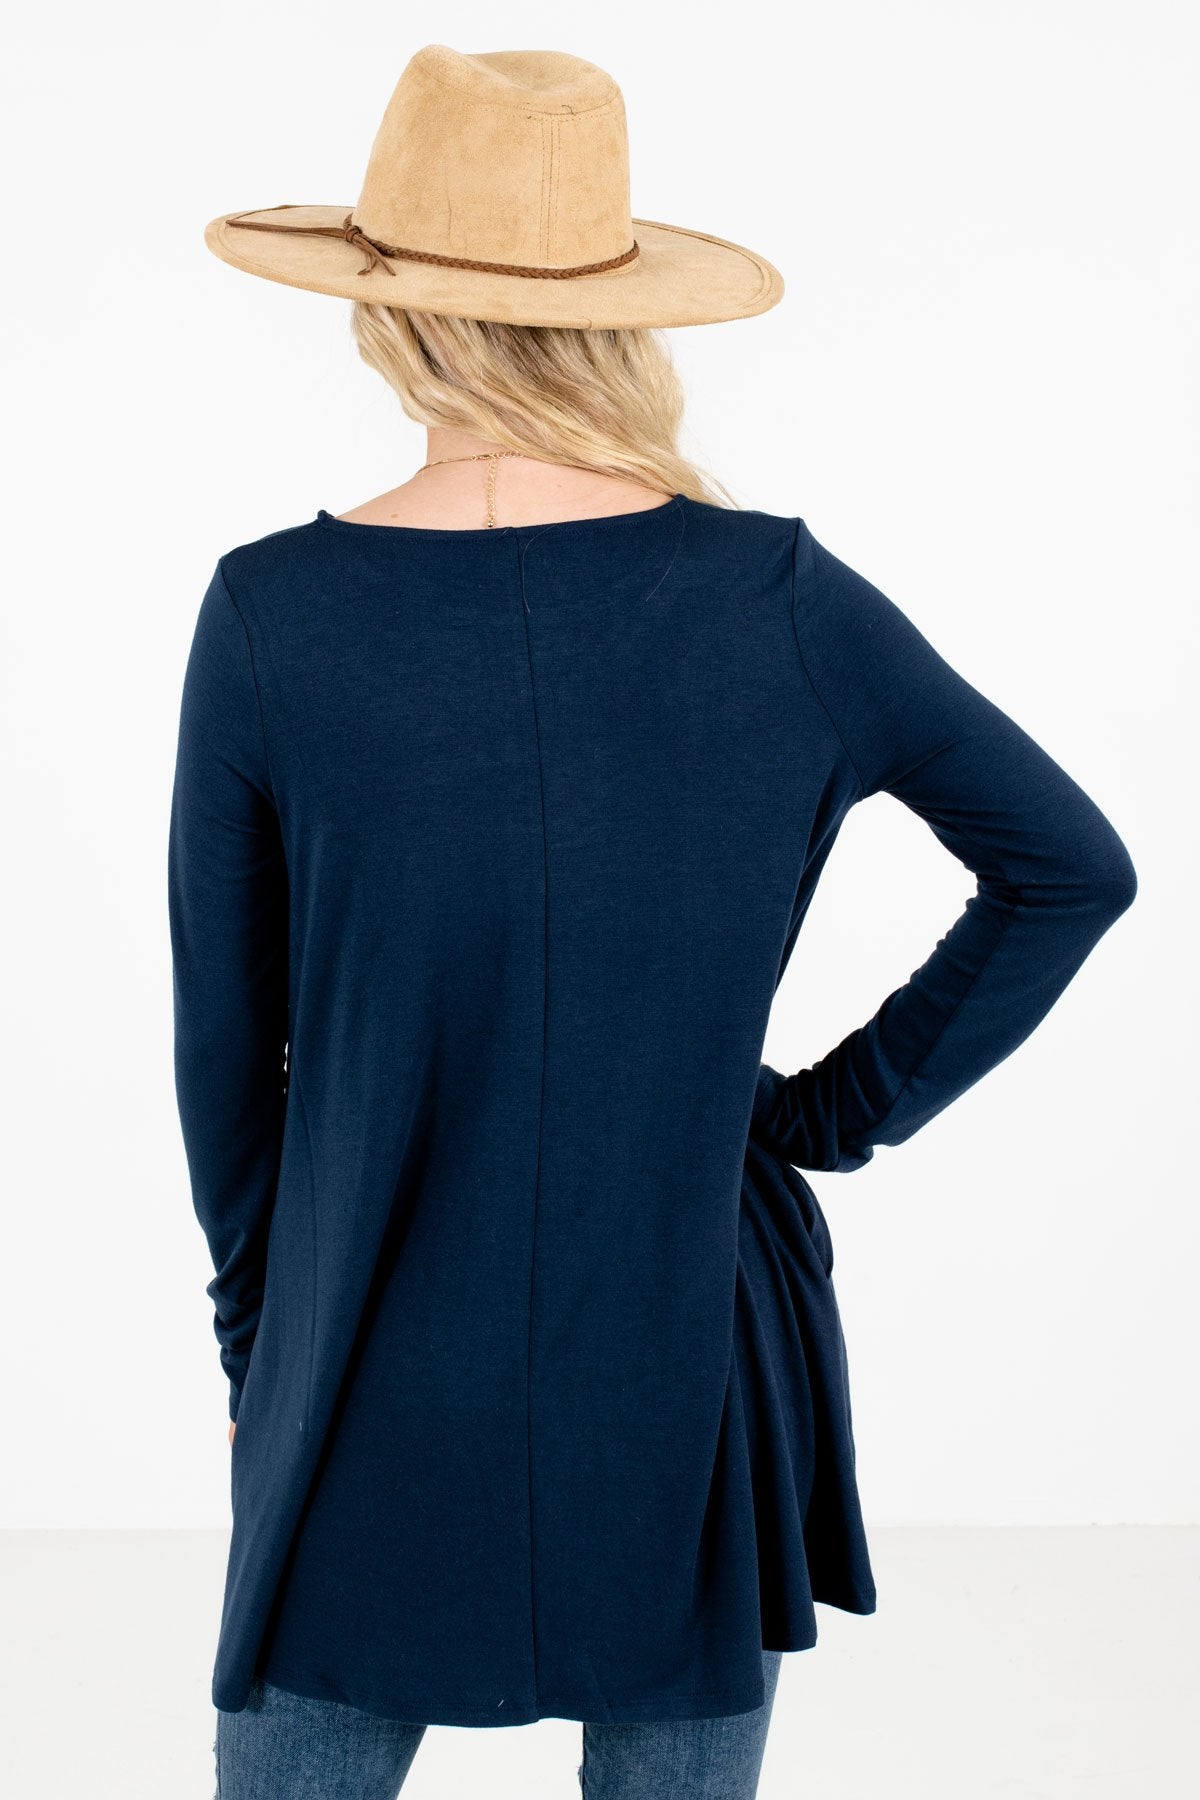 Women's Navy Blue Boutique Top with Pockets